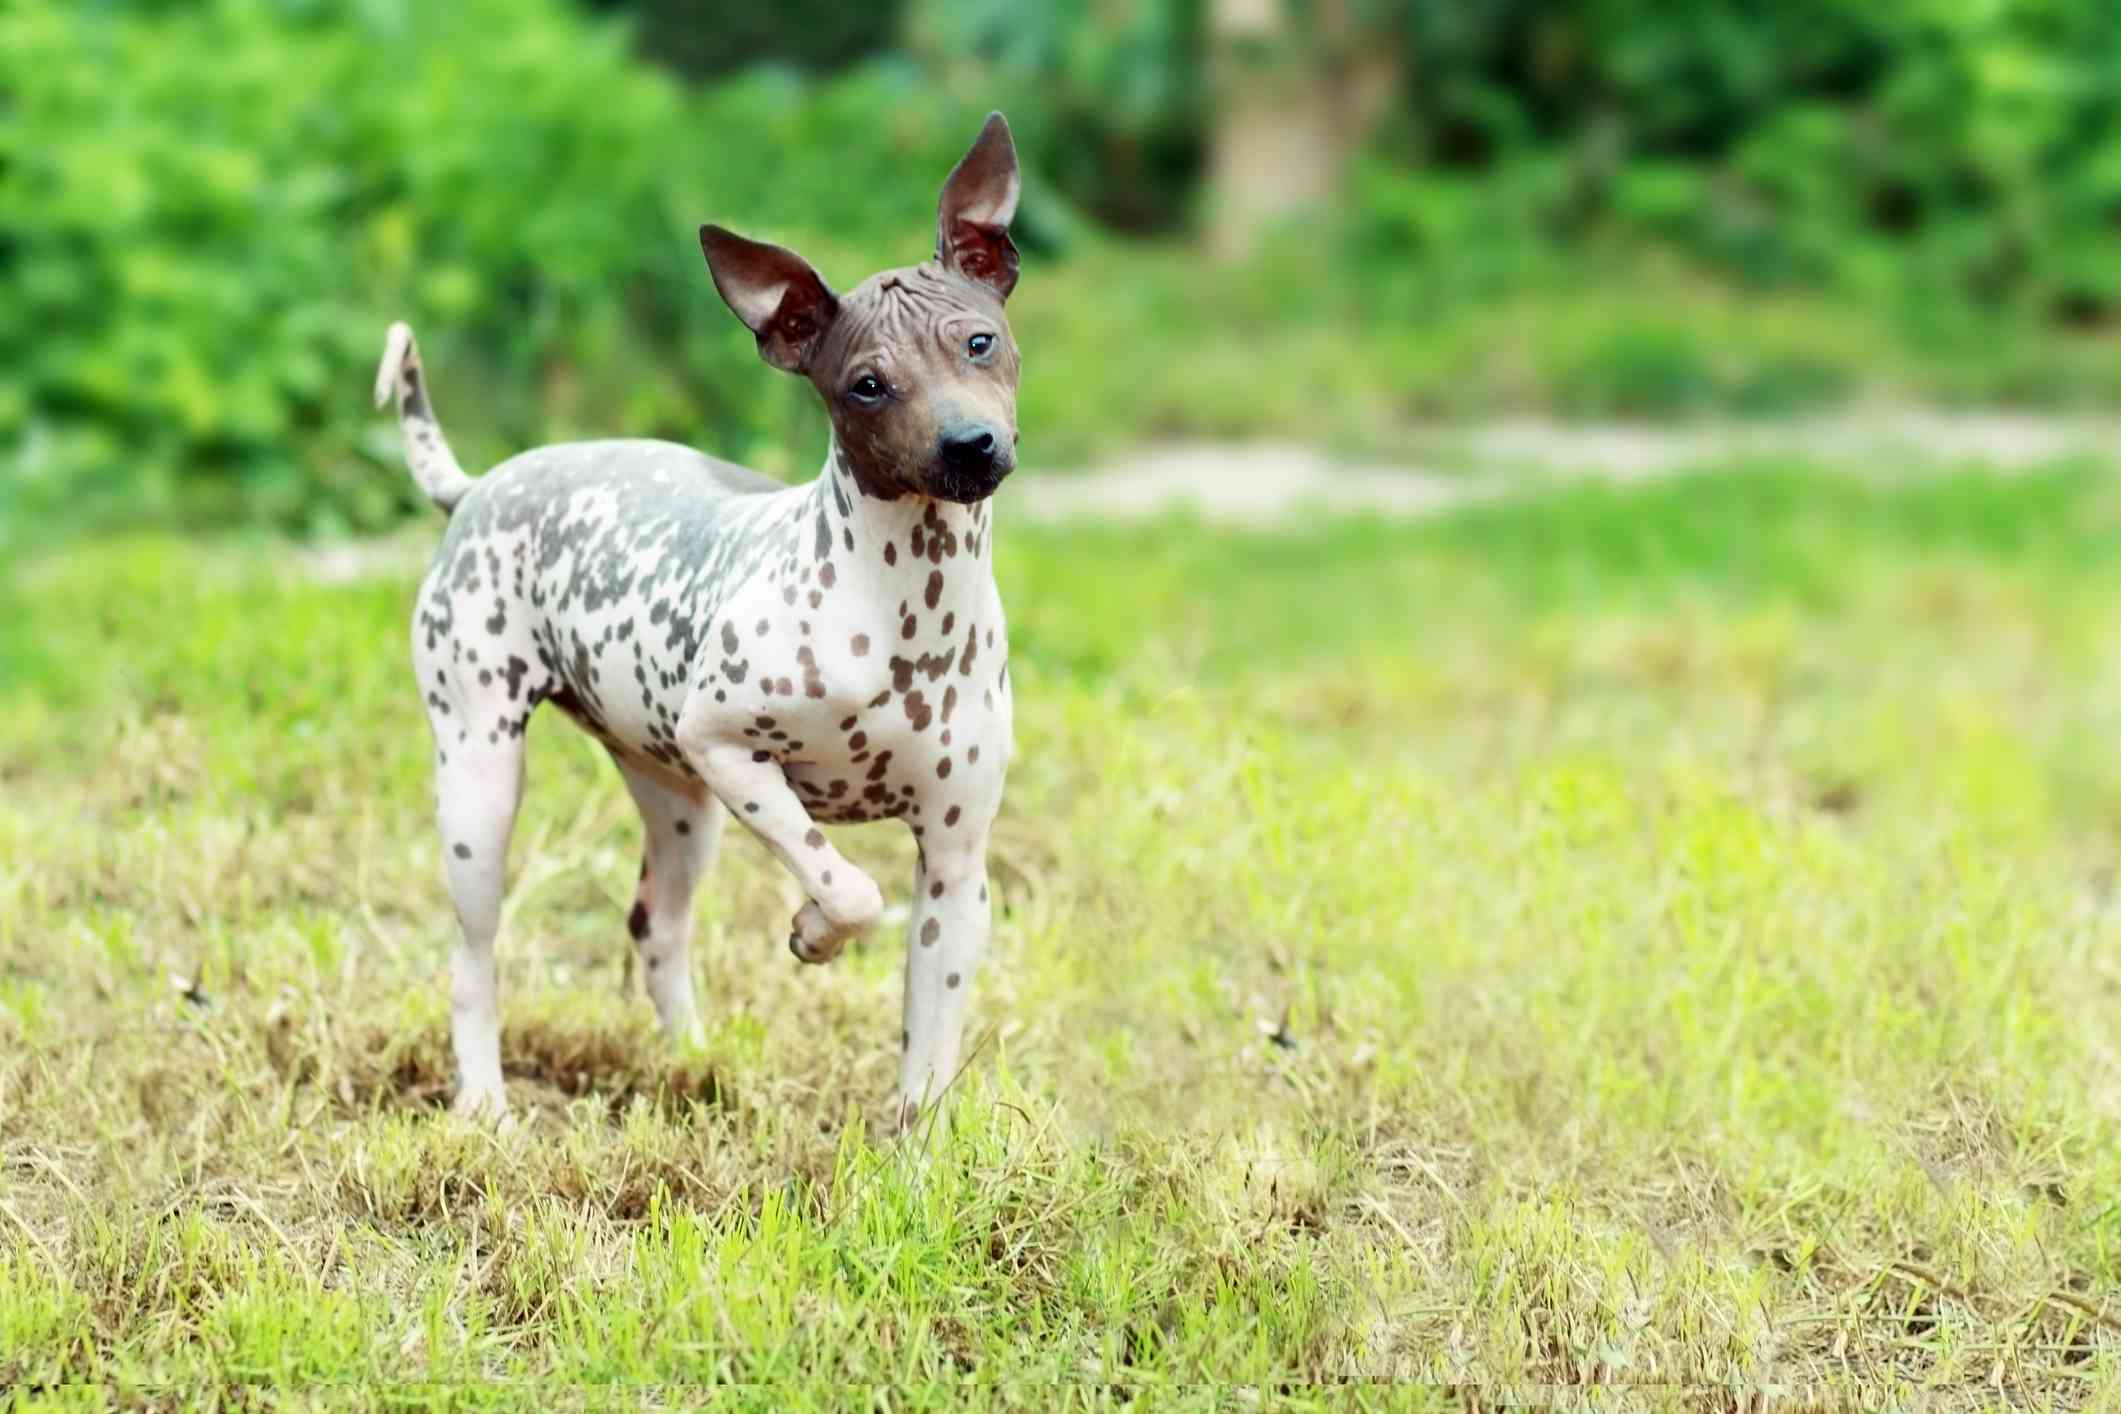 A hairless dog with a brown head and a brown and white spotted body prancing in the grass.